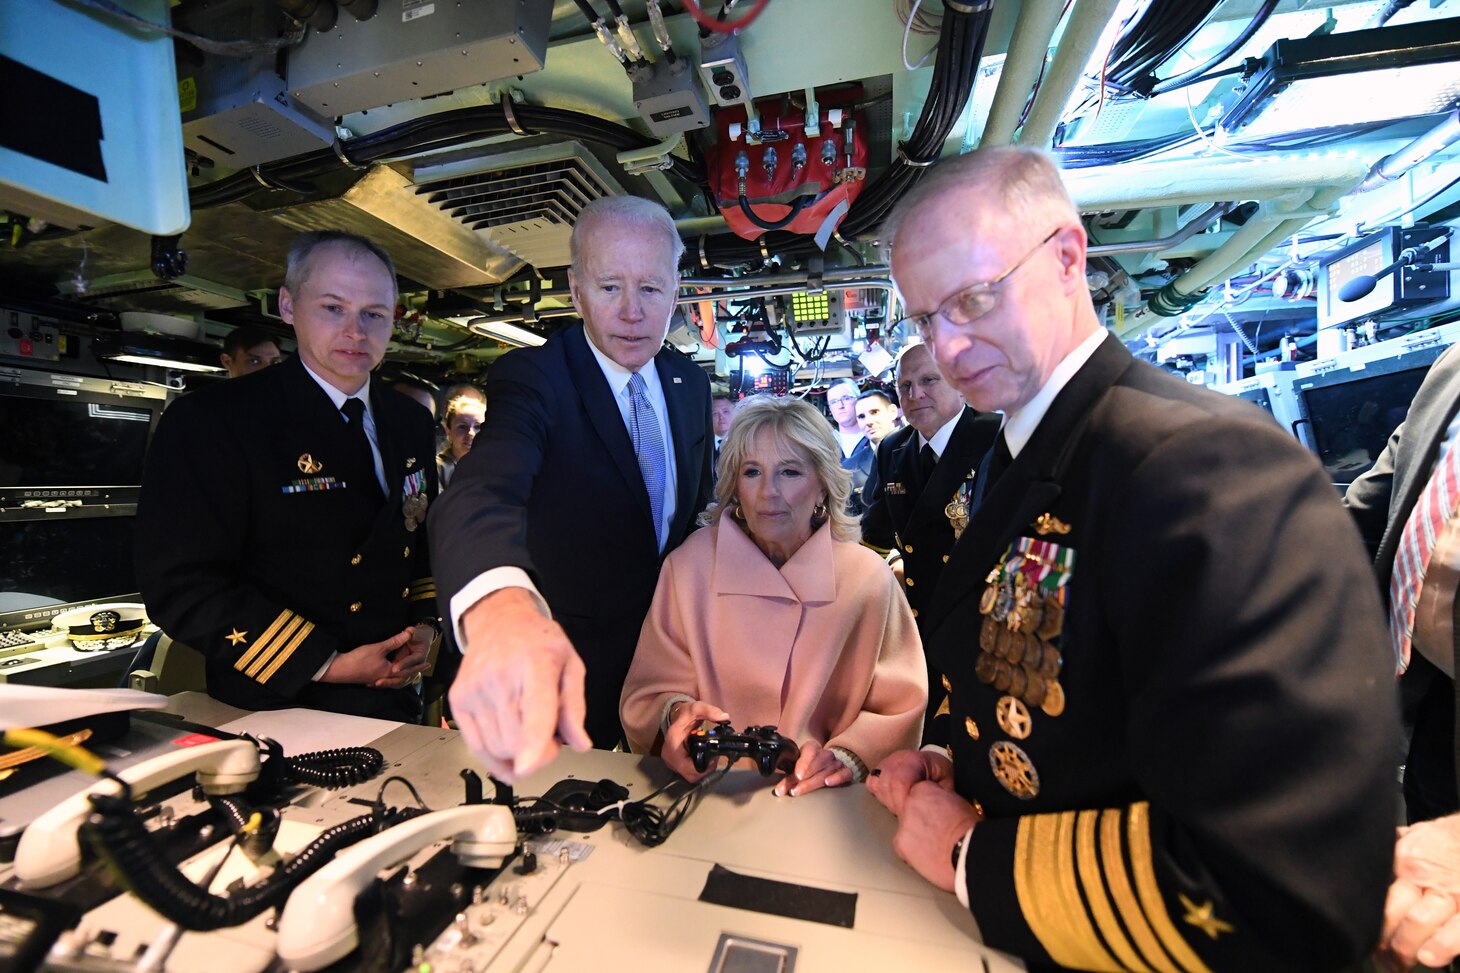 President of the United States Joe Biden and First Lady Jill Biden operate the periscope using a video game controller alongside U.S. Fleet Forces commander Adm. Daryl Caudle, right, and Cmdr. Matthew Horton, commanding officer of the Virginia-class submarine USS Delaware (SSN 791), following a commissioning commemoration ceremony in Wilmington, Delaware April 2, 2022.